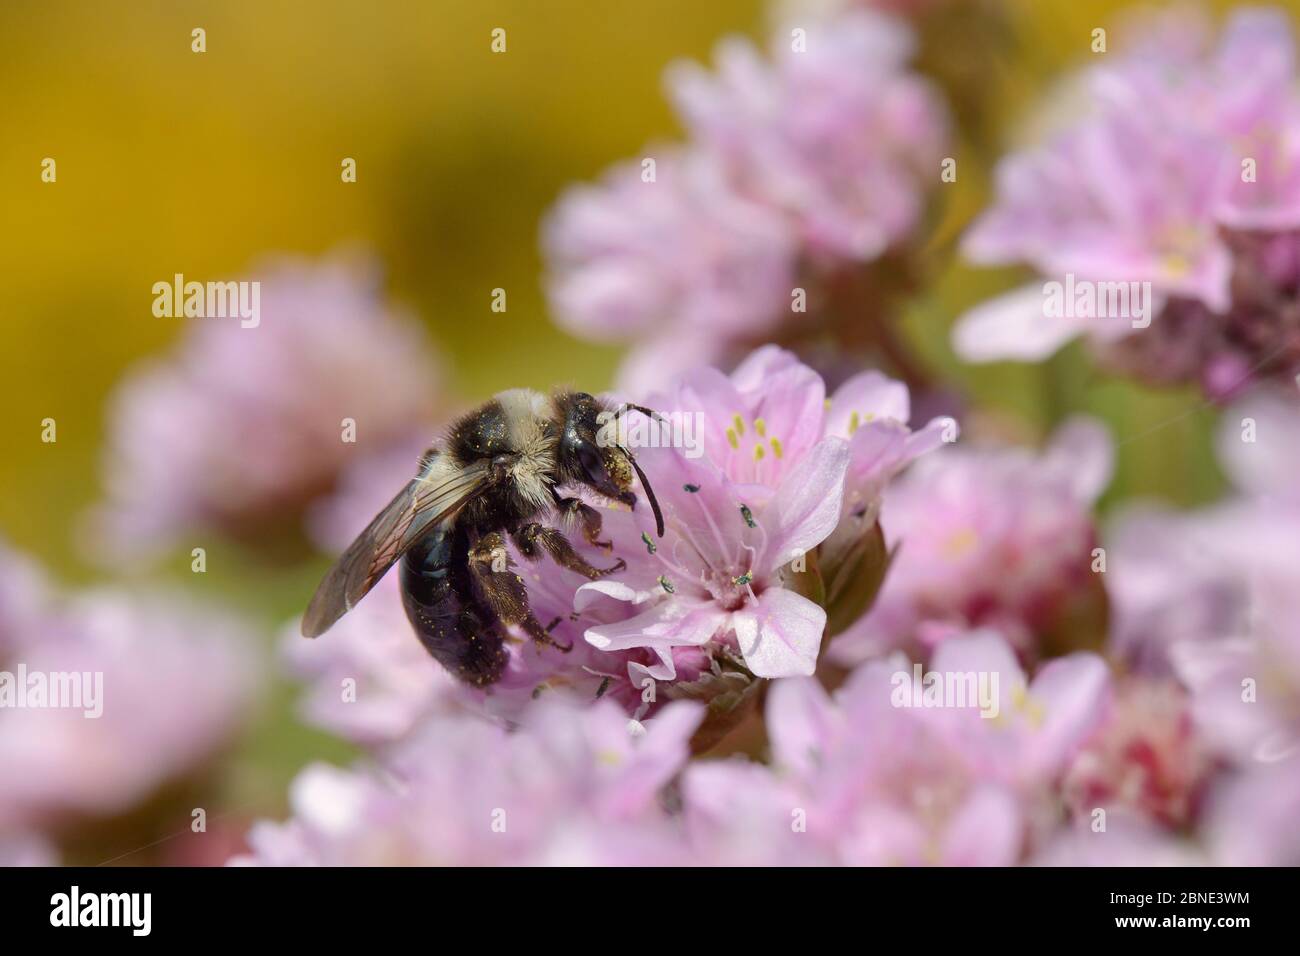 Grey / Ashy mining bee (Andrena cineraria) foraging on a Sea thrift  flowers (Armeria maritima) on a cliff top with Common gorse (Ulex europaea) bushe Stock Photo